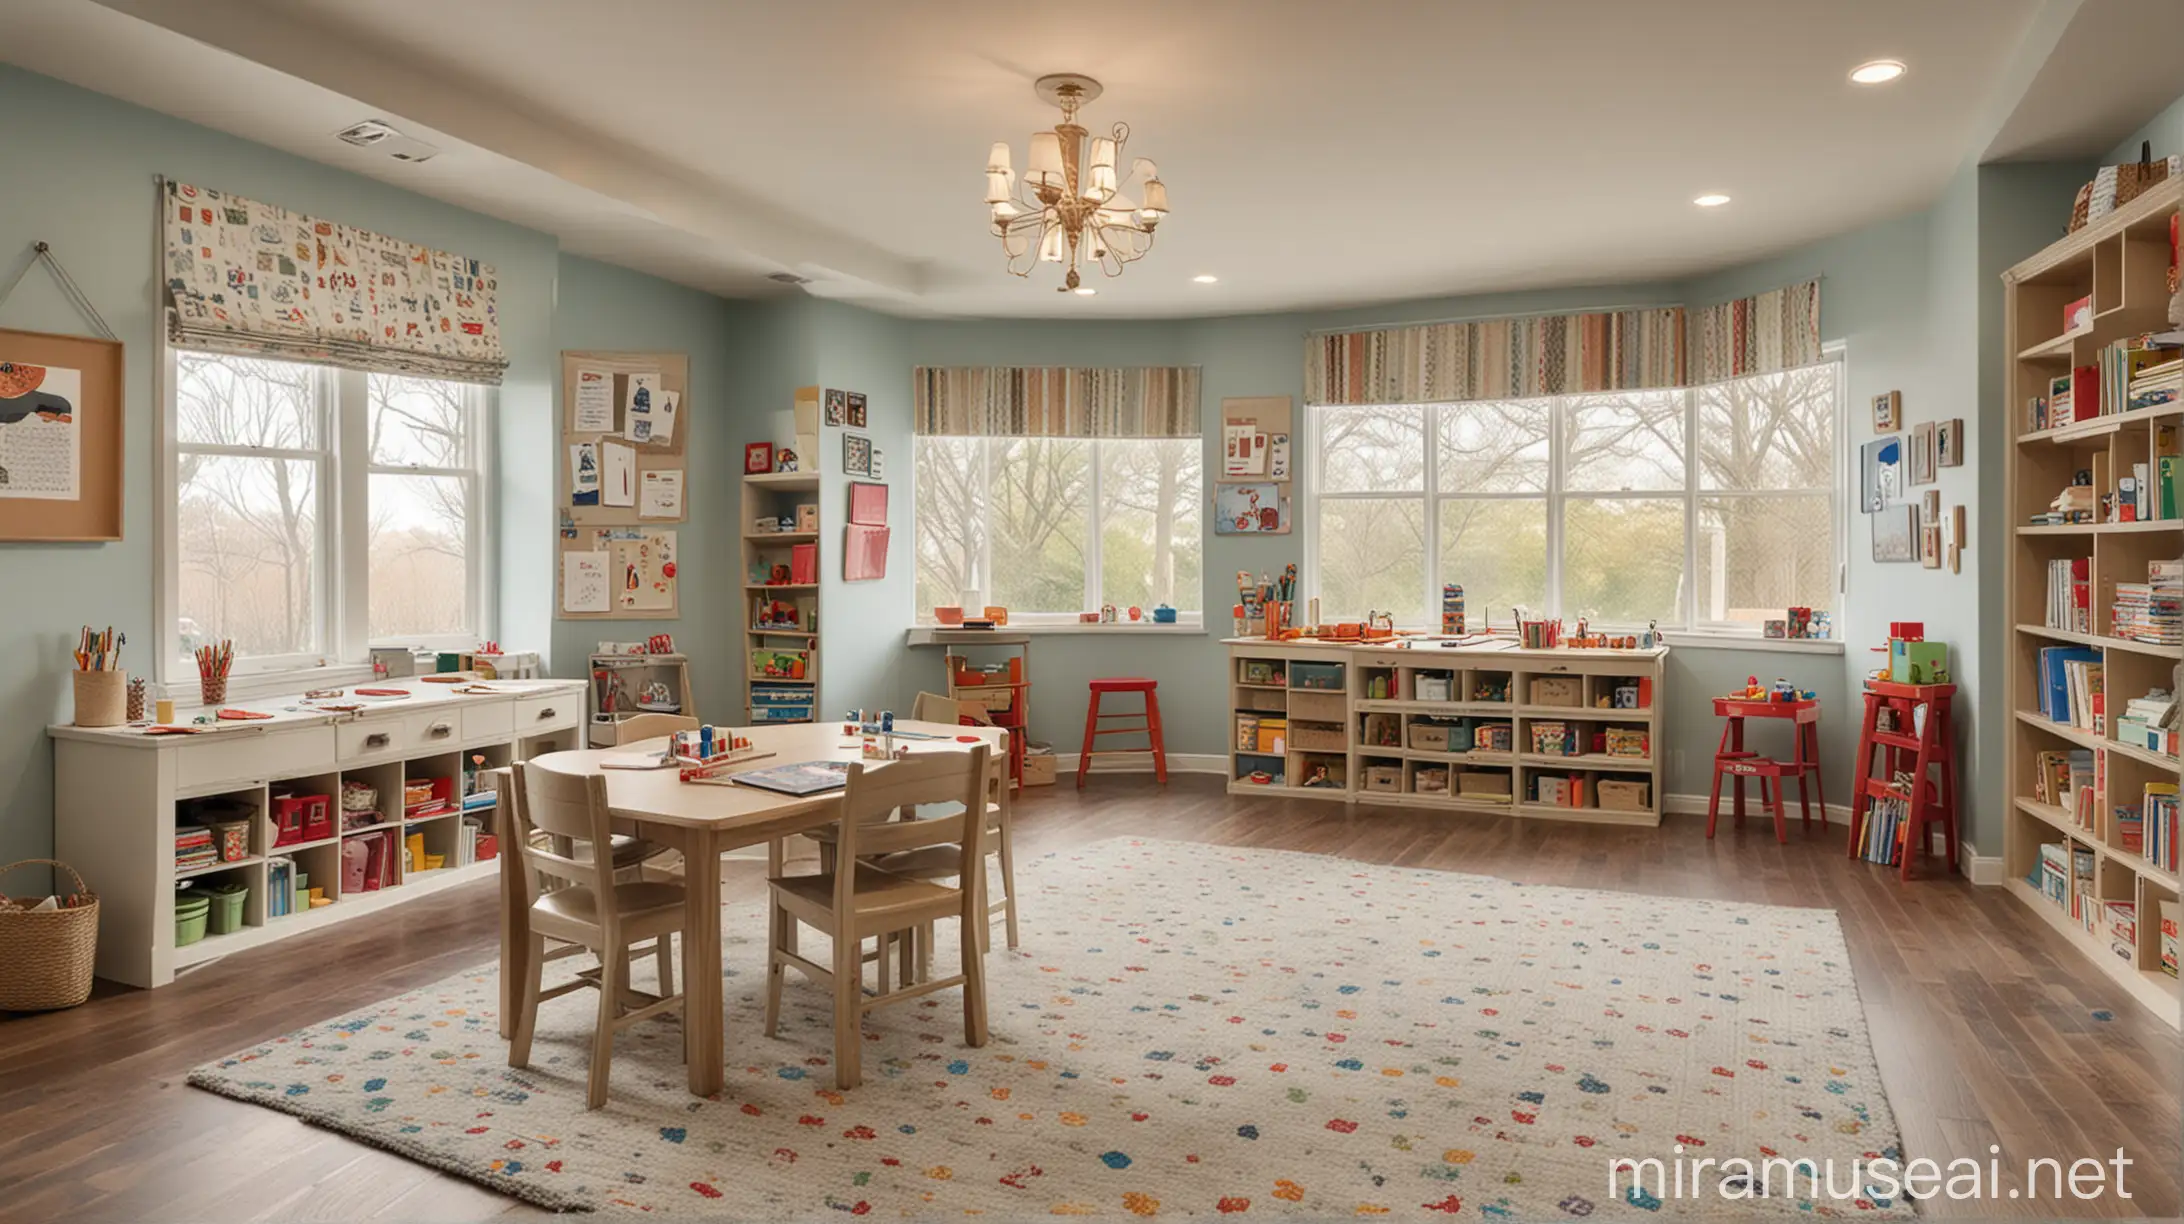 Vibrant Creative Playroom for Arts and Crafts Enthusiasts